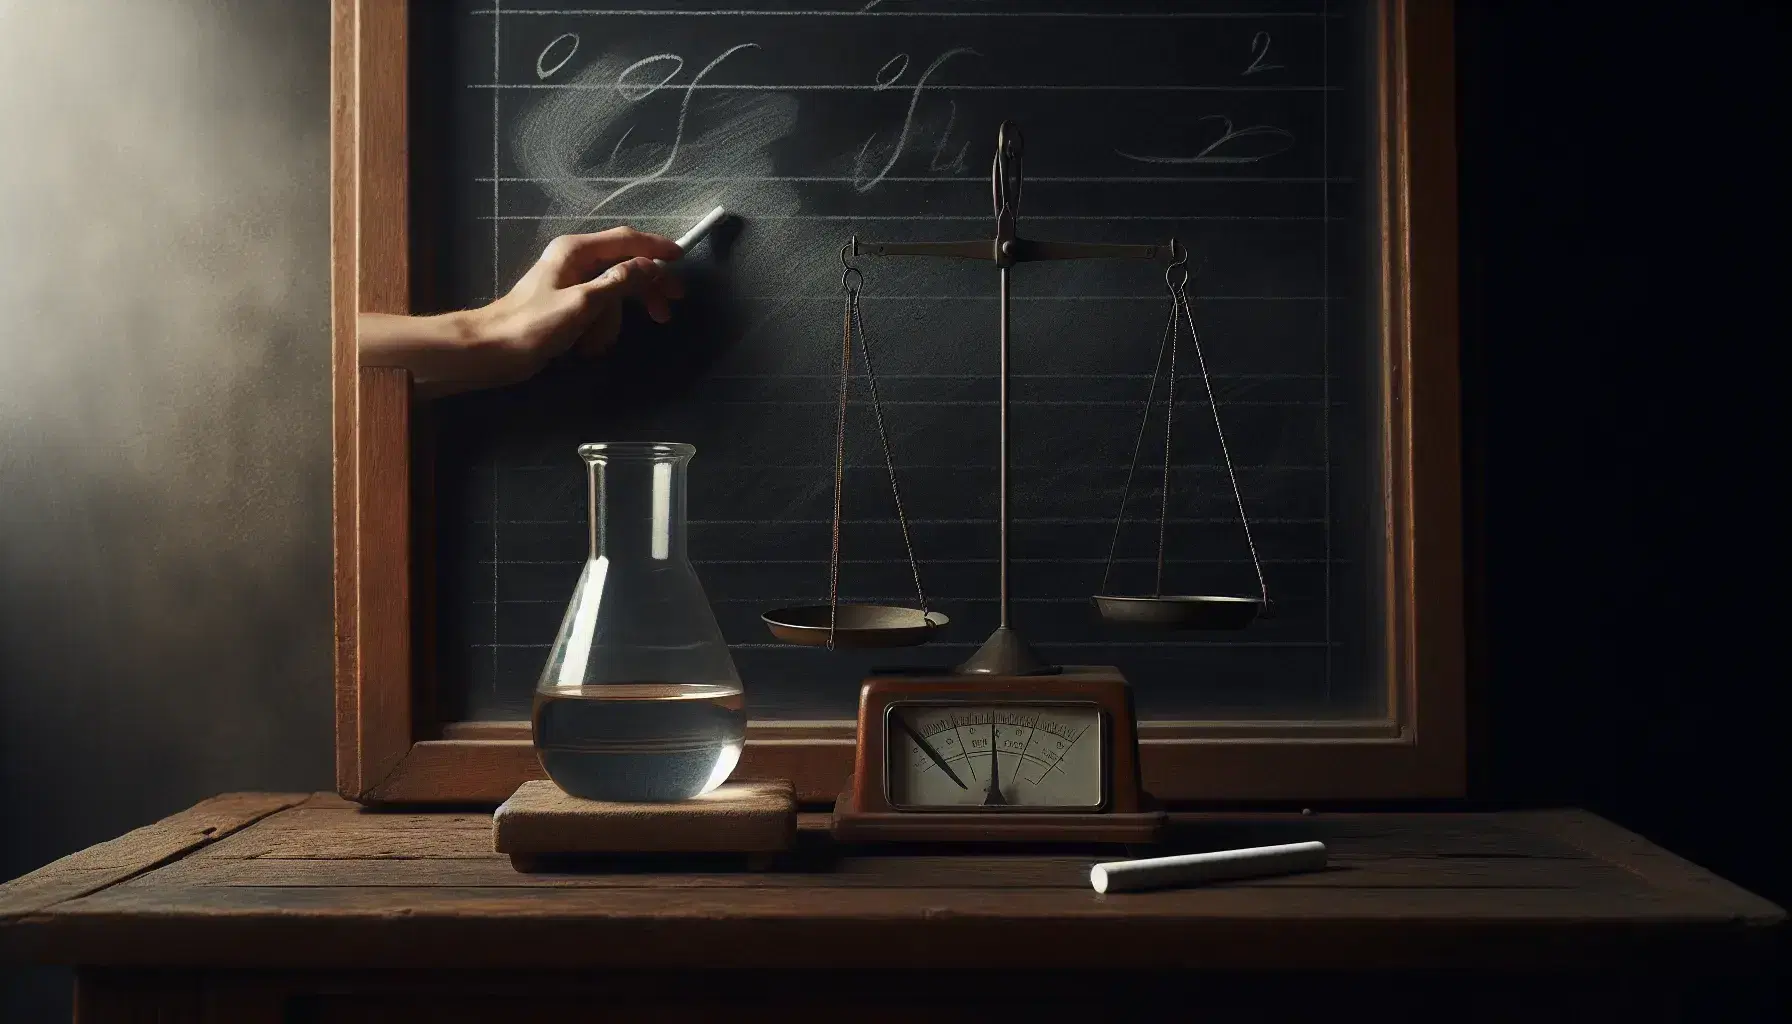 Close-up view of a clean blackboard with chalk dust, a hand holding chalk near a beaker with liquid, and an unused metallic balance scale on a desk.